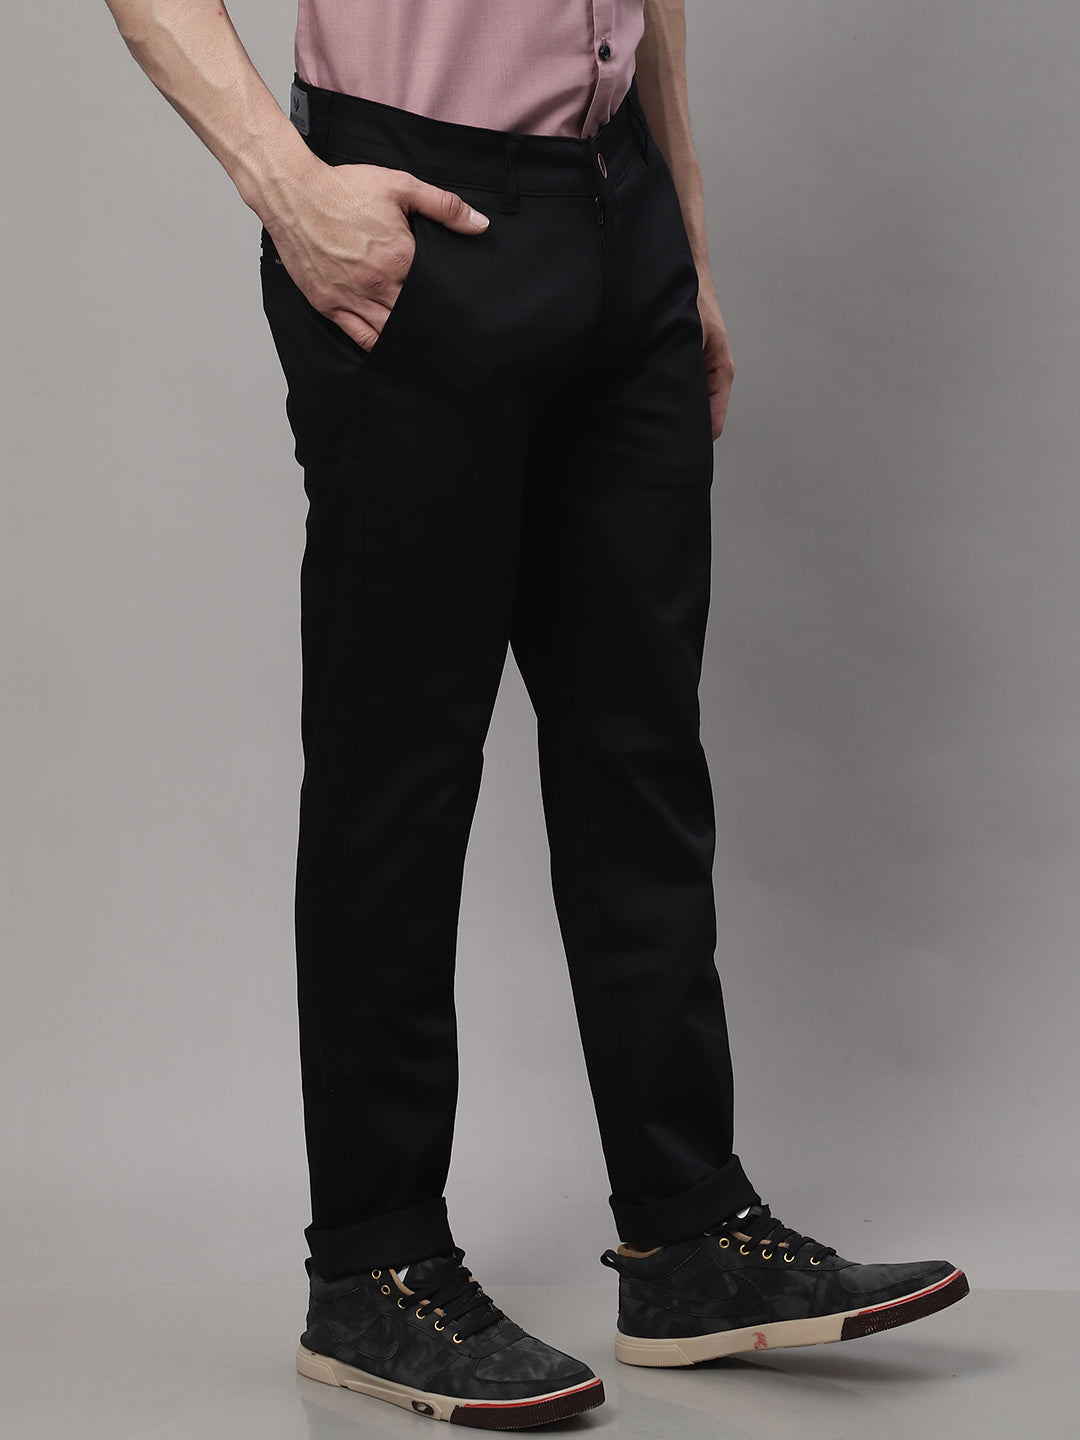 Majestic Man Regular Fit Satin Finish Cotton Casual Solid Chinos Trouser - Black